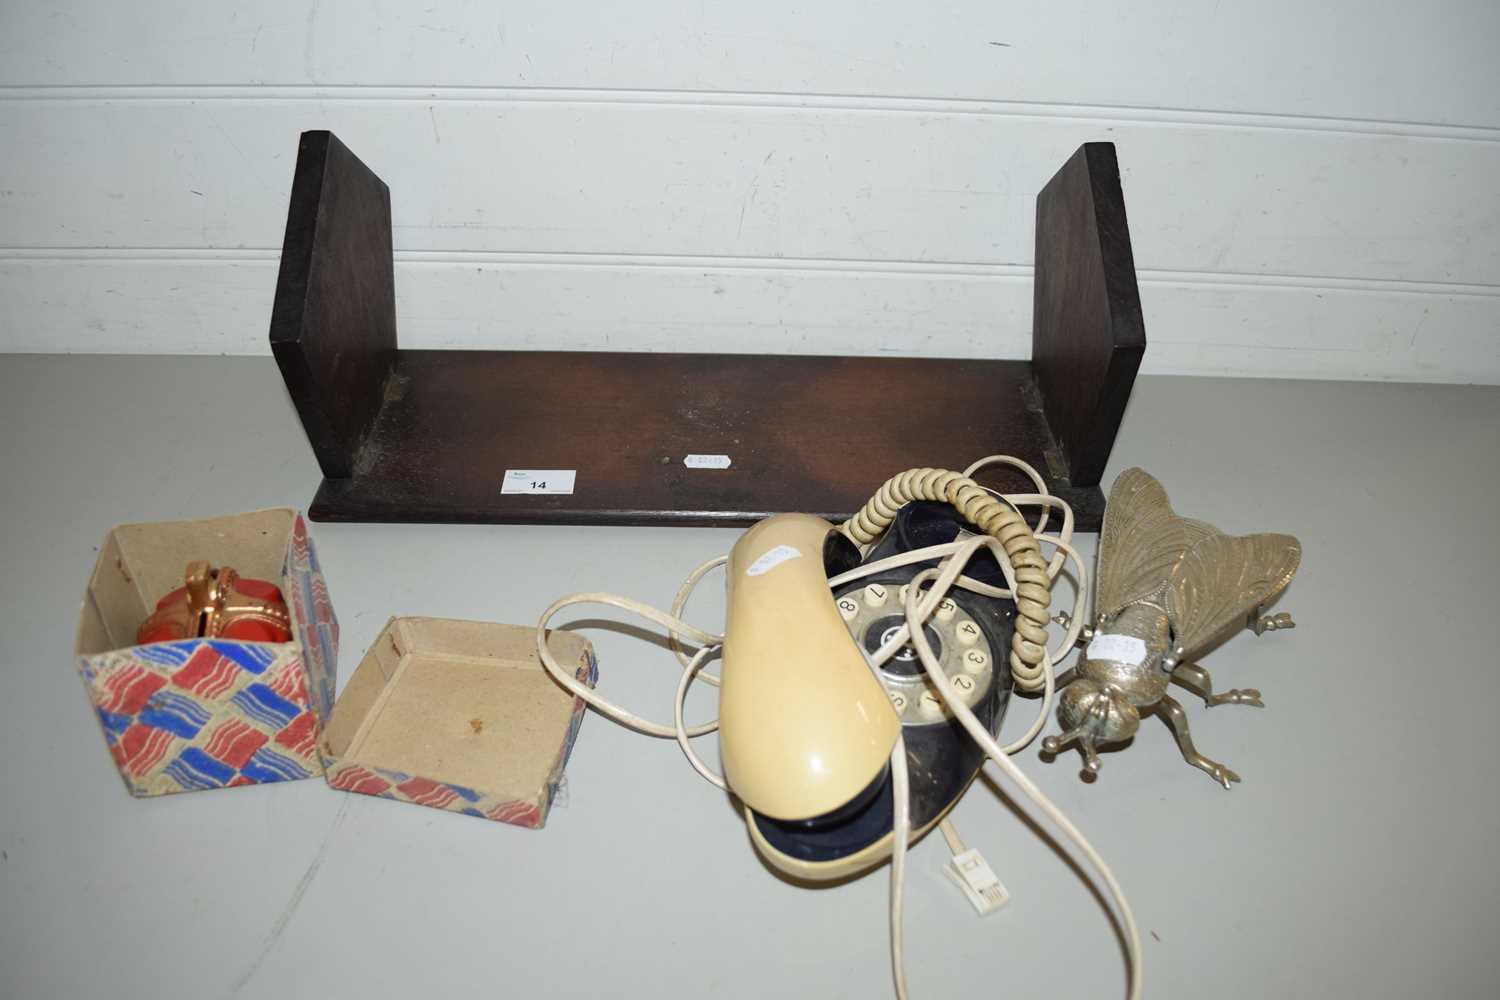 MIXED LOT COMPRISING A HARDWOOD BOOK RACK, A CROWN FORMED MONEY BOX, VINTAGE TELEPHONE AND A FLY